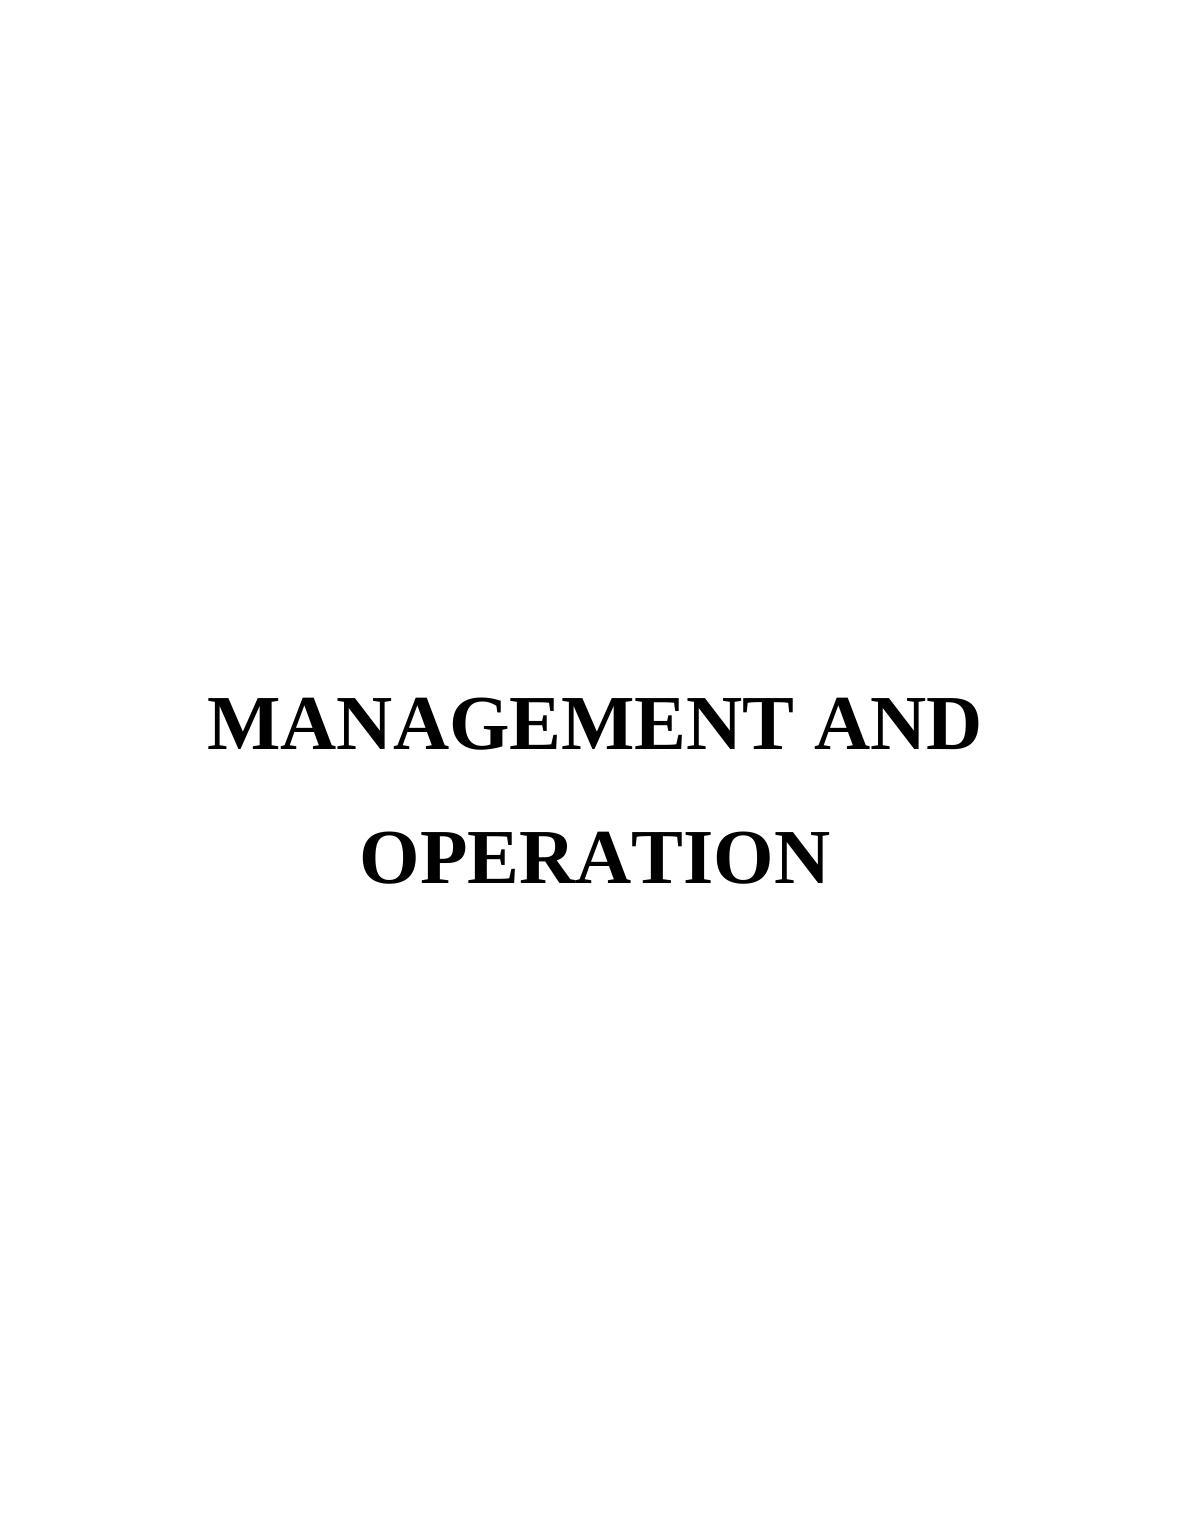 Research on Management And Operation - Marks and Spencer_1